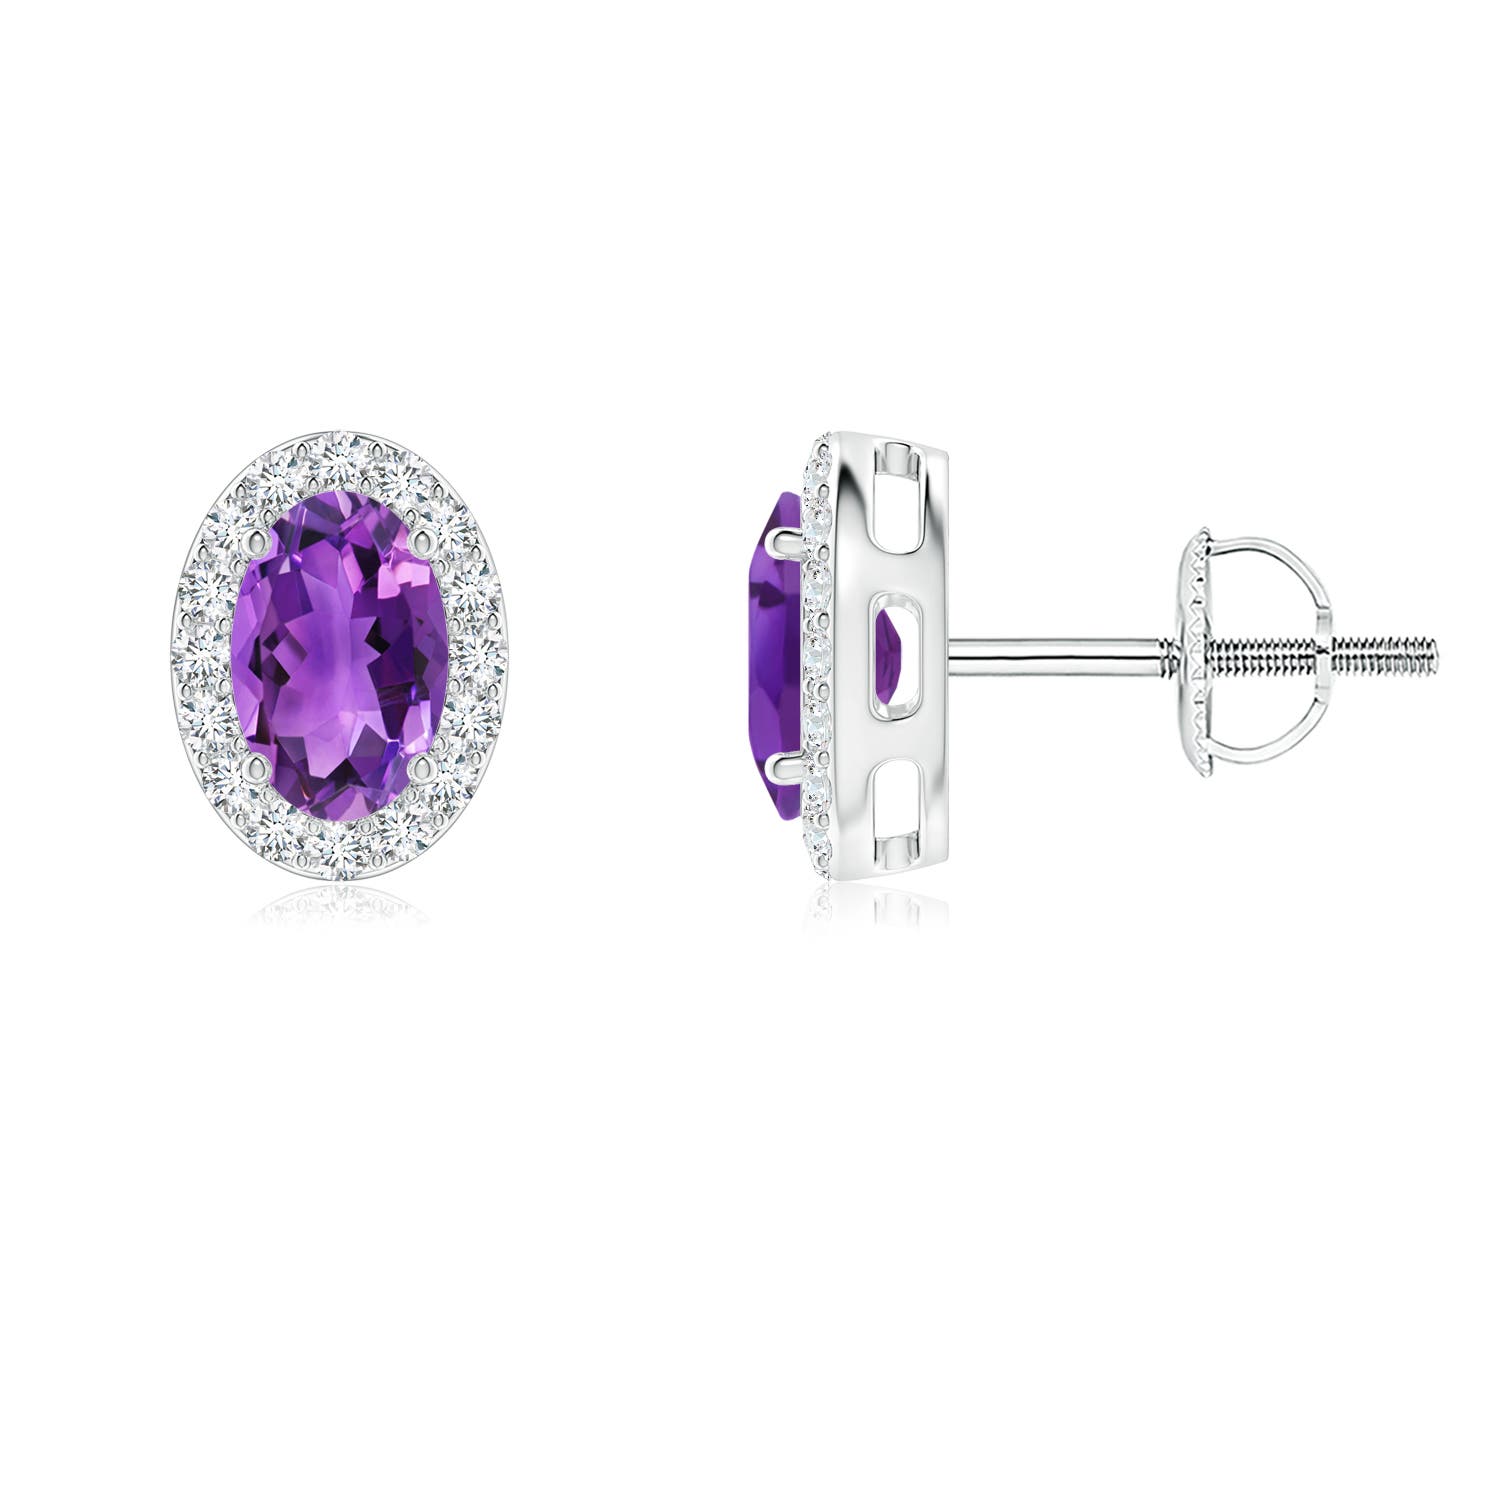 AAA - Amethyst / 0.99 CT / 14 KT White Gold